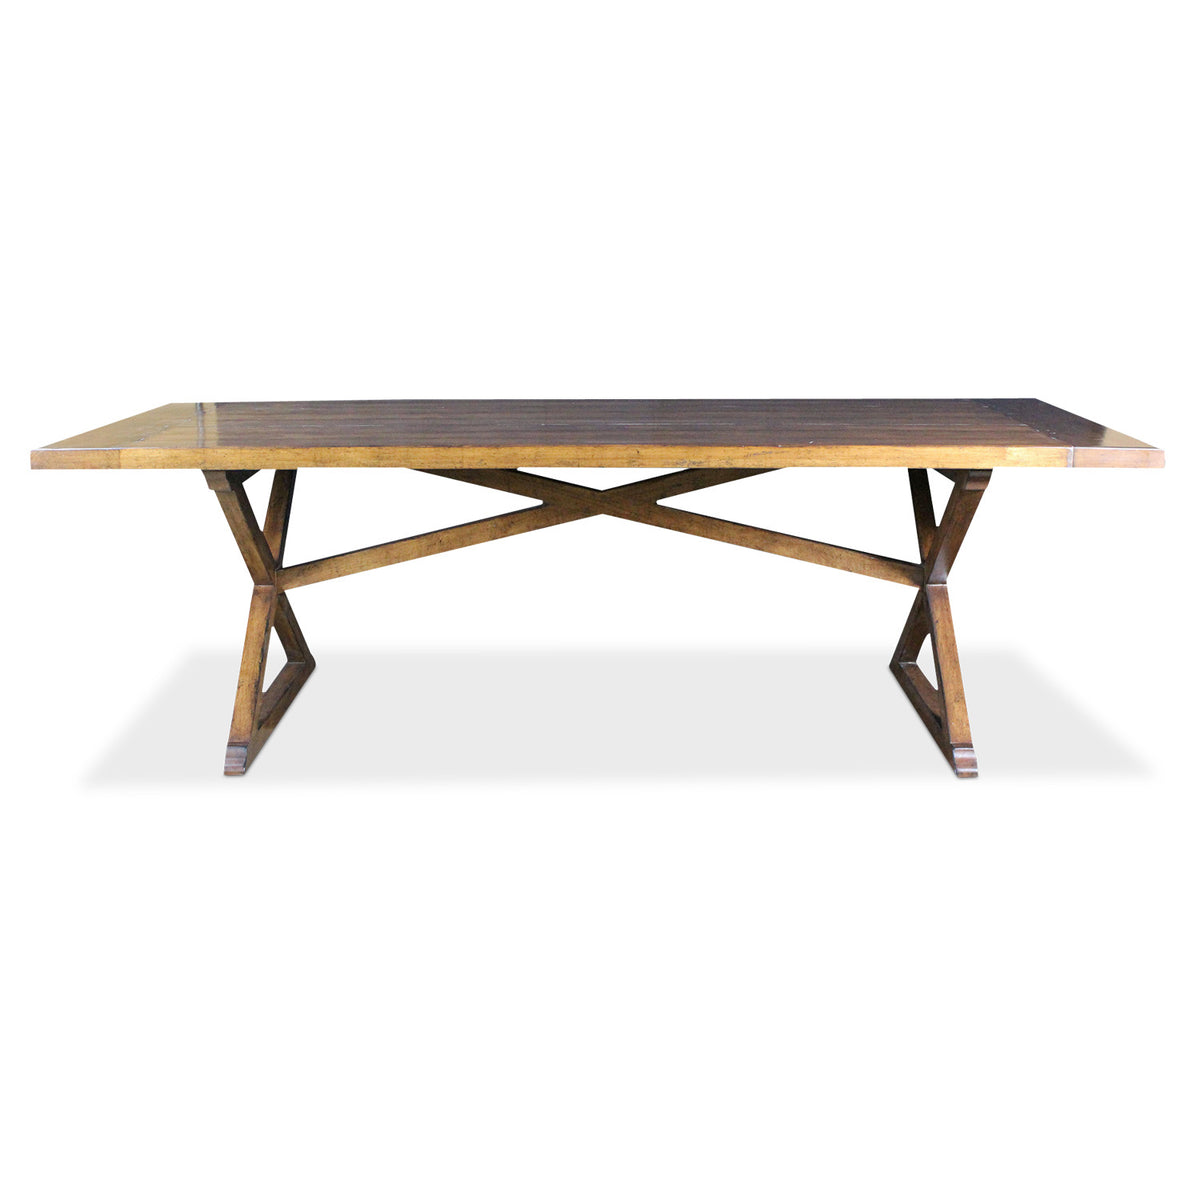 Litchfield Dining Table